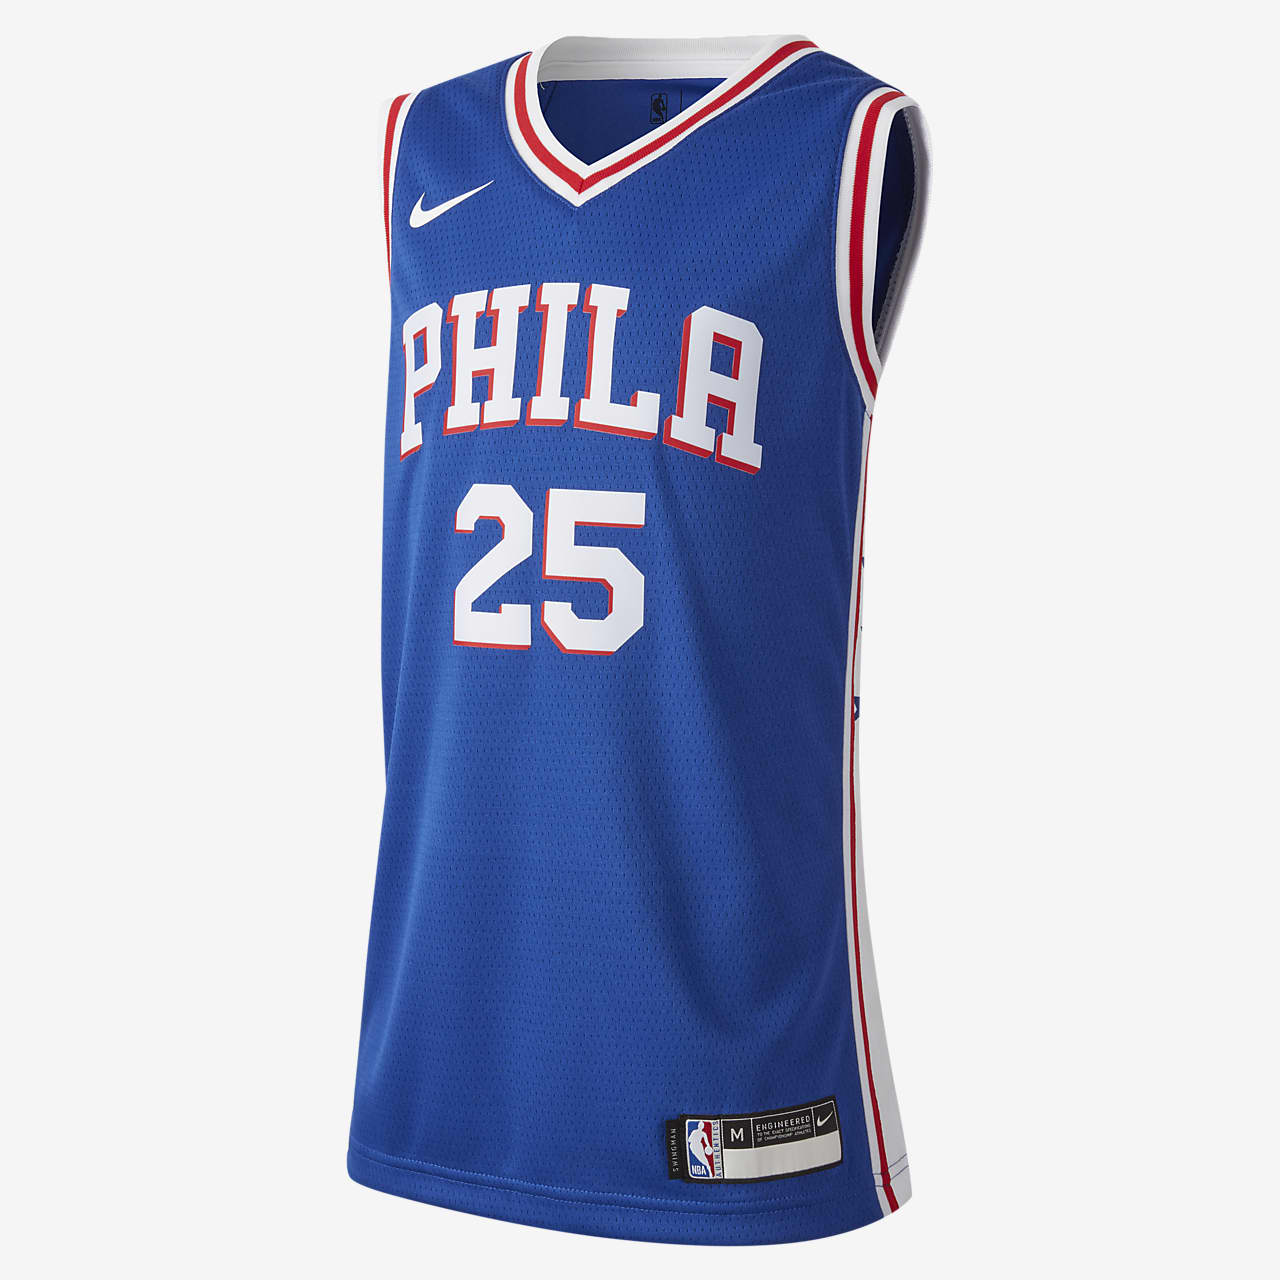 white and blue nba jersey